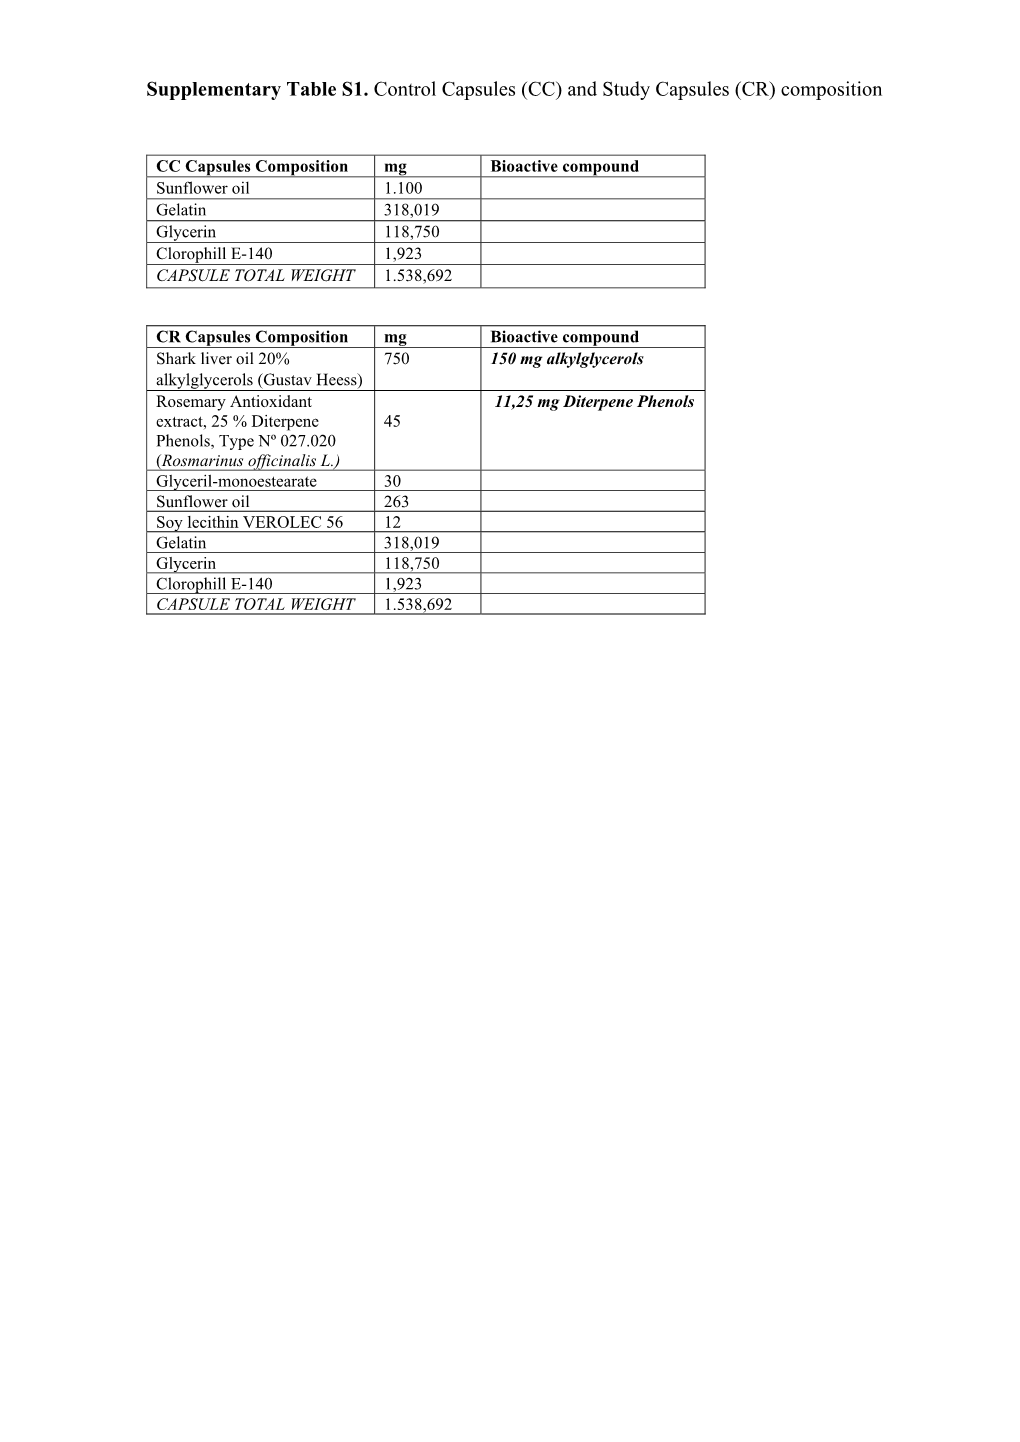 Supplementary Table S1. Control Capsules (CC) and Study Capsules (CR) Composition